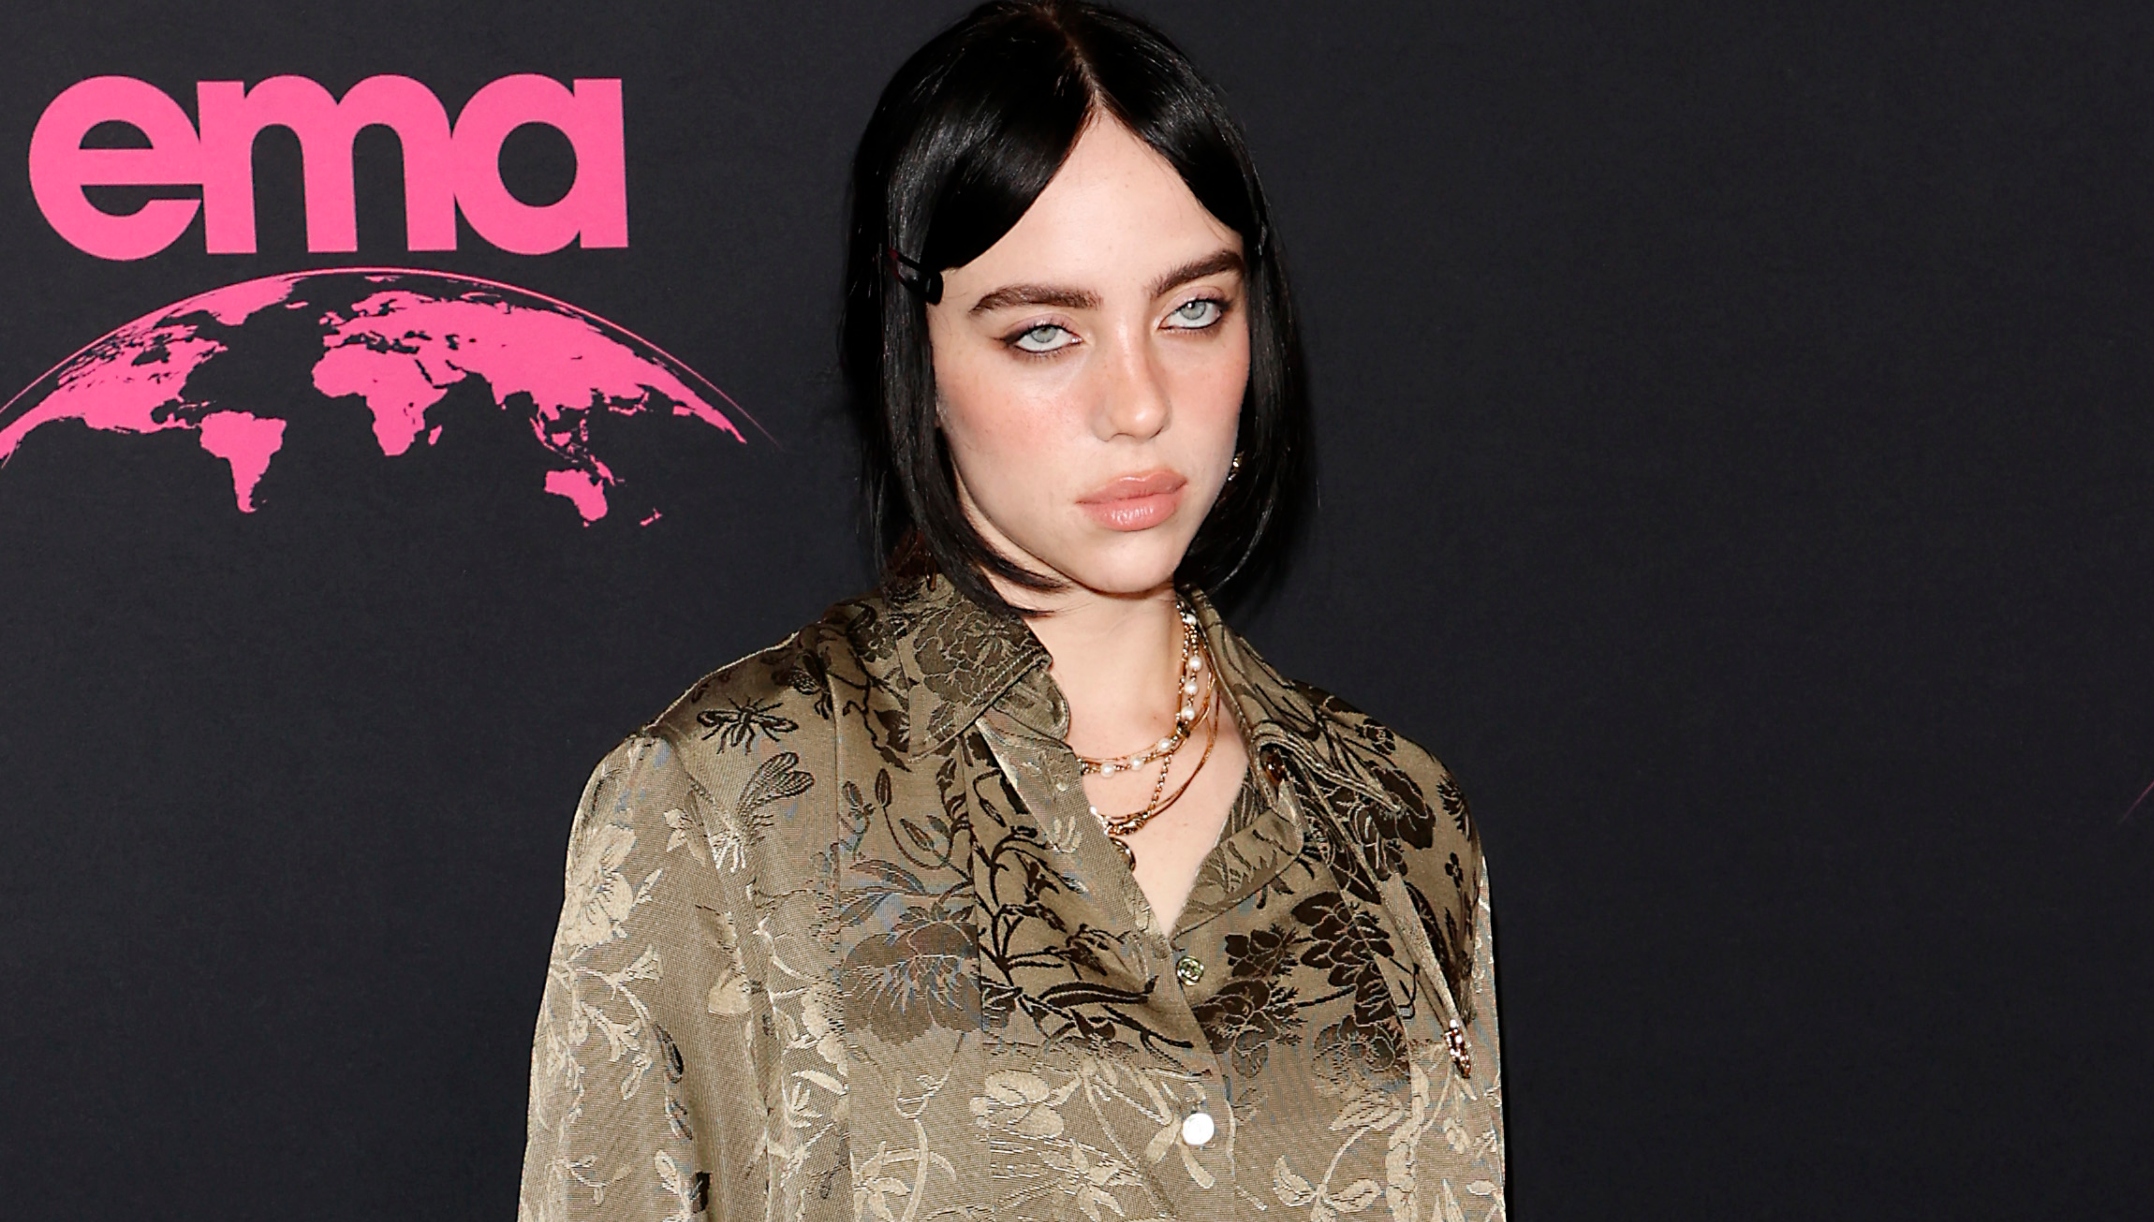 In a black swimsuit Billie Eilish is seen in the pool - Trending News